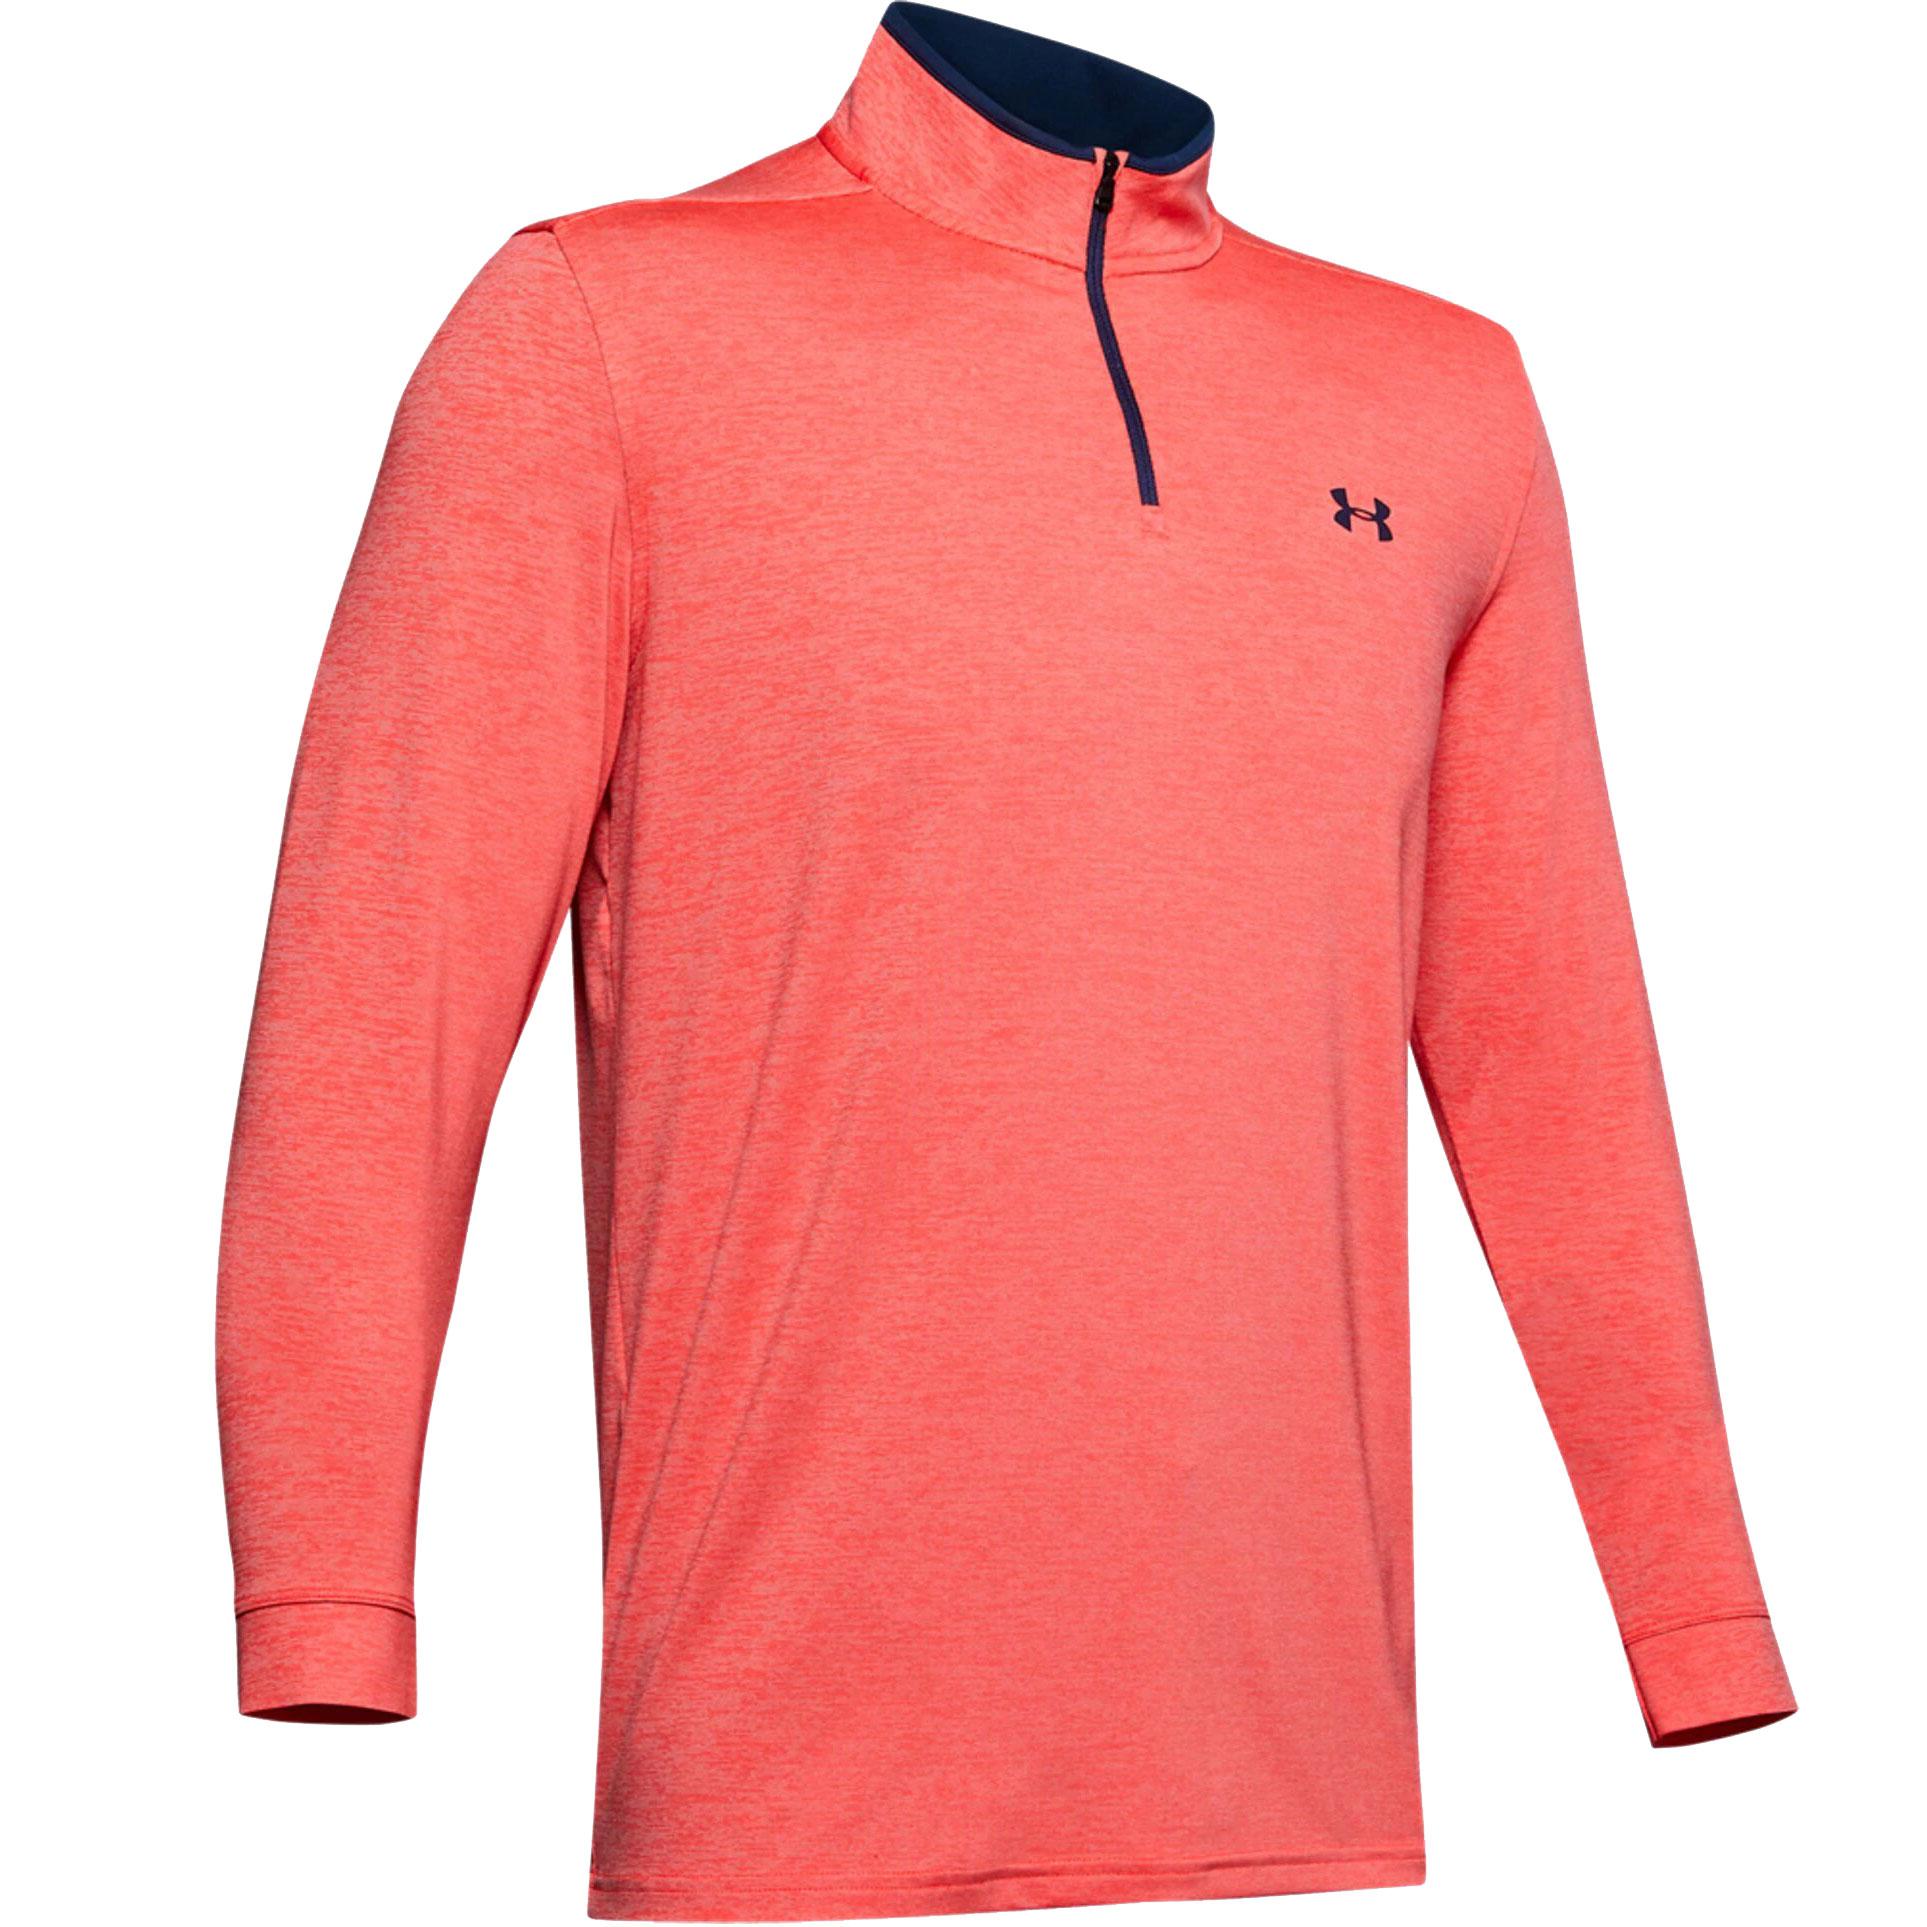 red under armour top